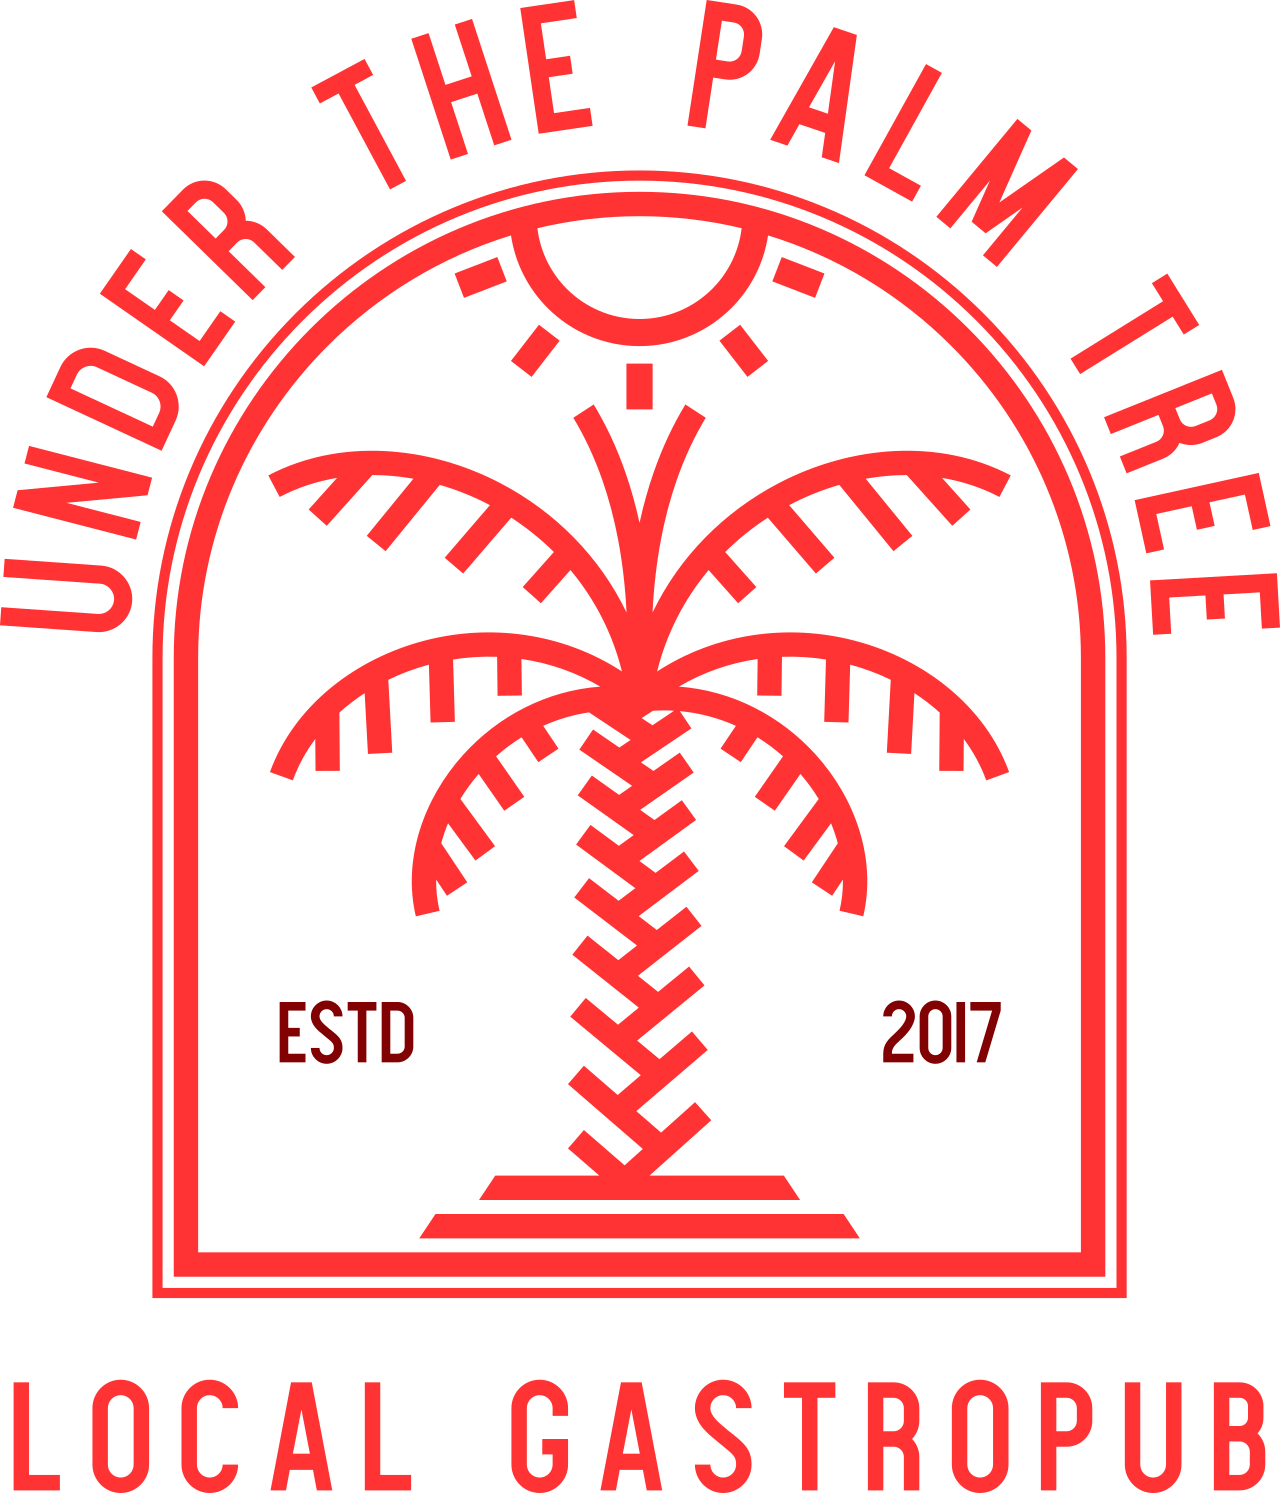 UNDER THE PALM TREE's web page